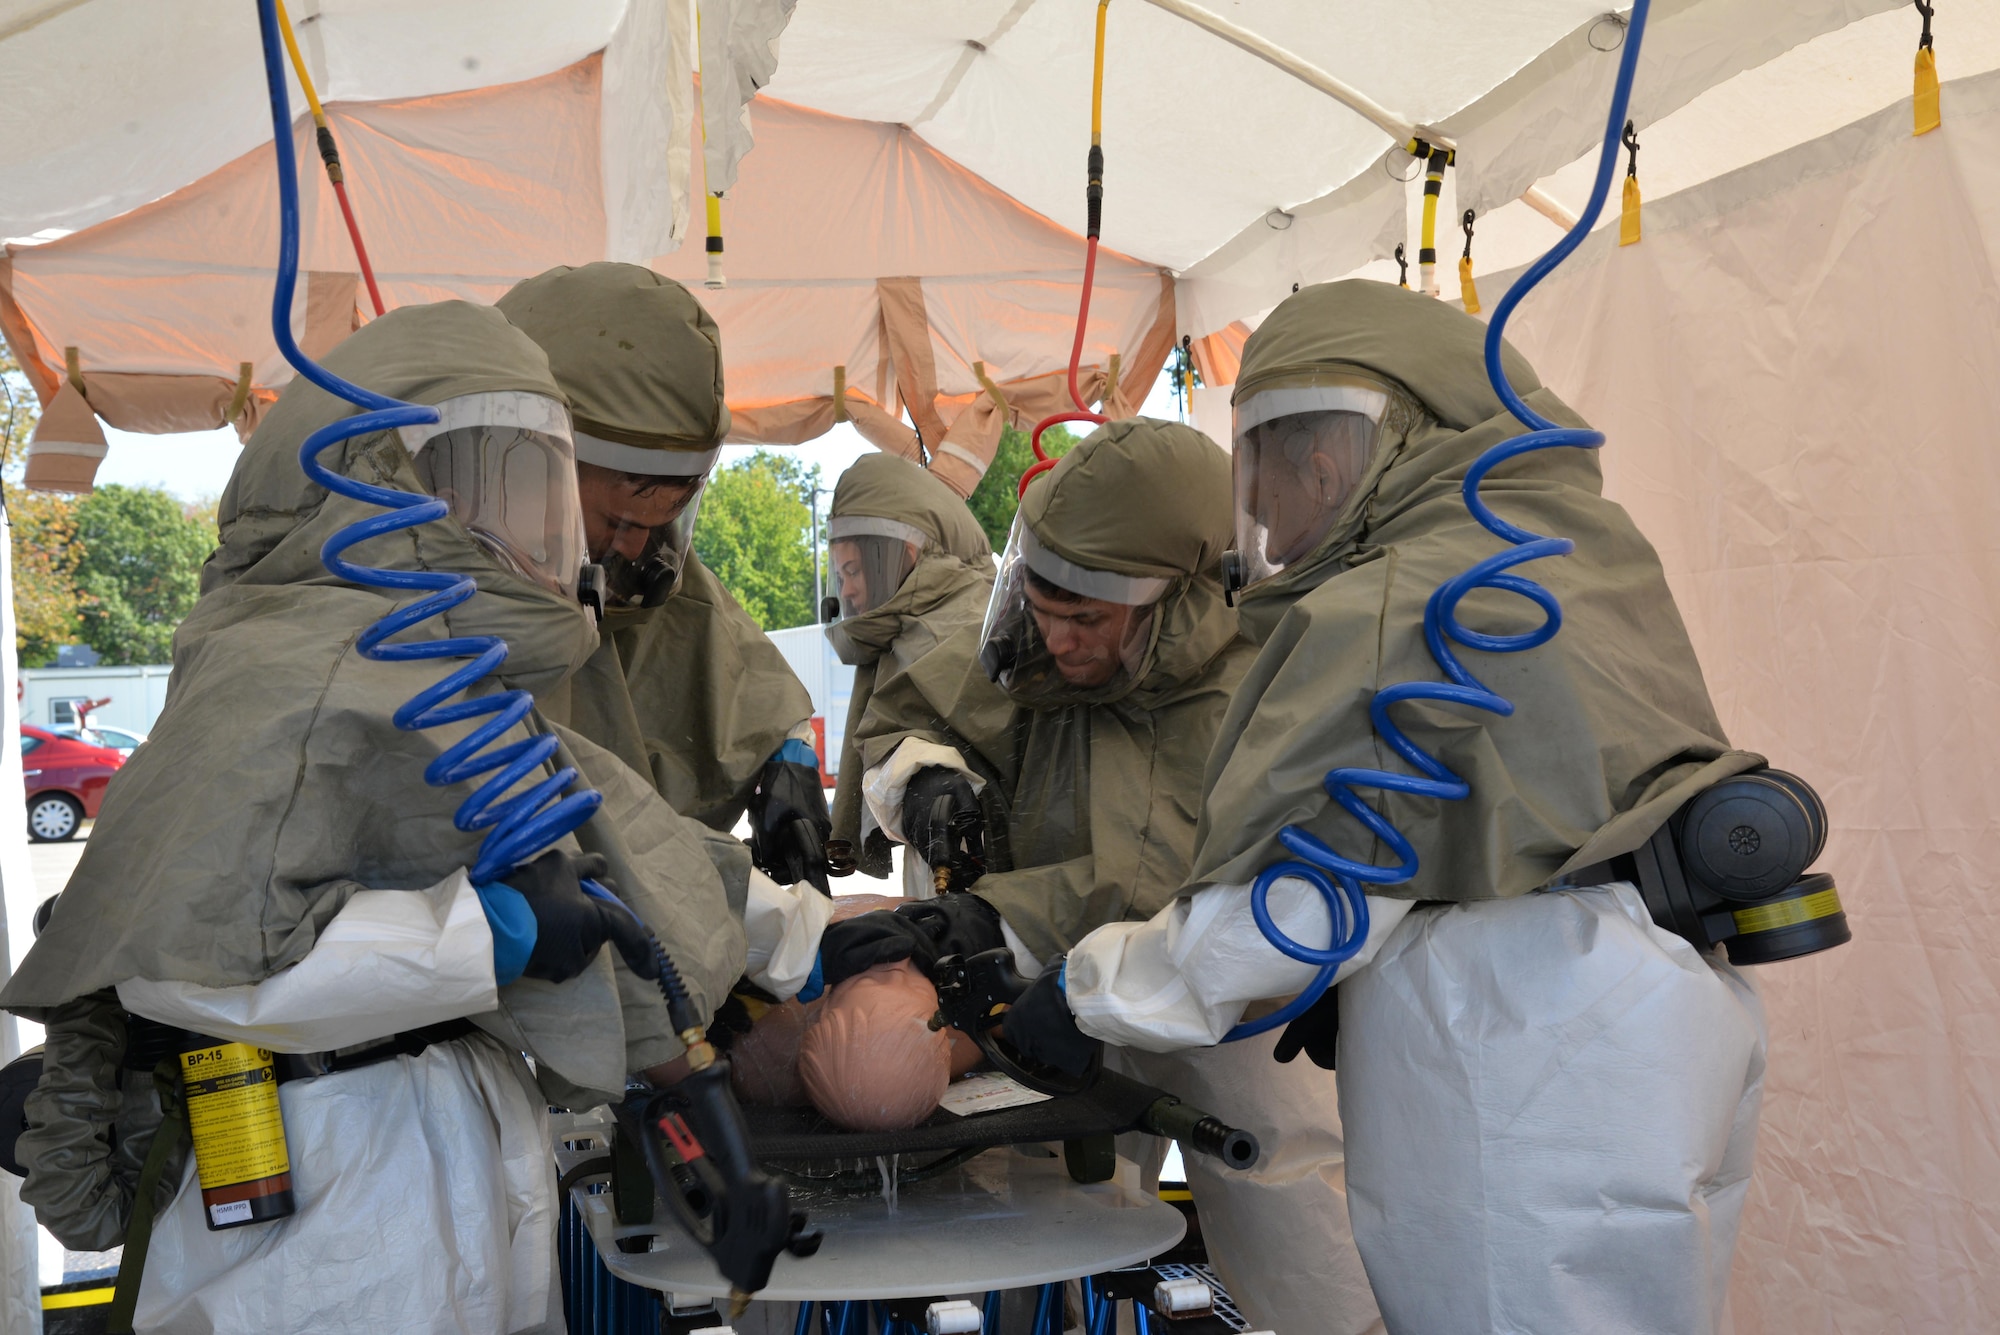 Members of the In-Place Patient Decontamination Team clean a mock patient at a wash station during IPPD training Sept. 28 at the base clinic.